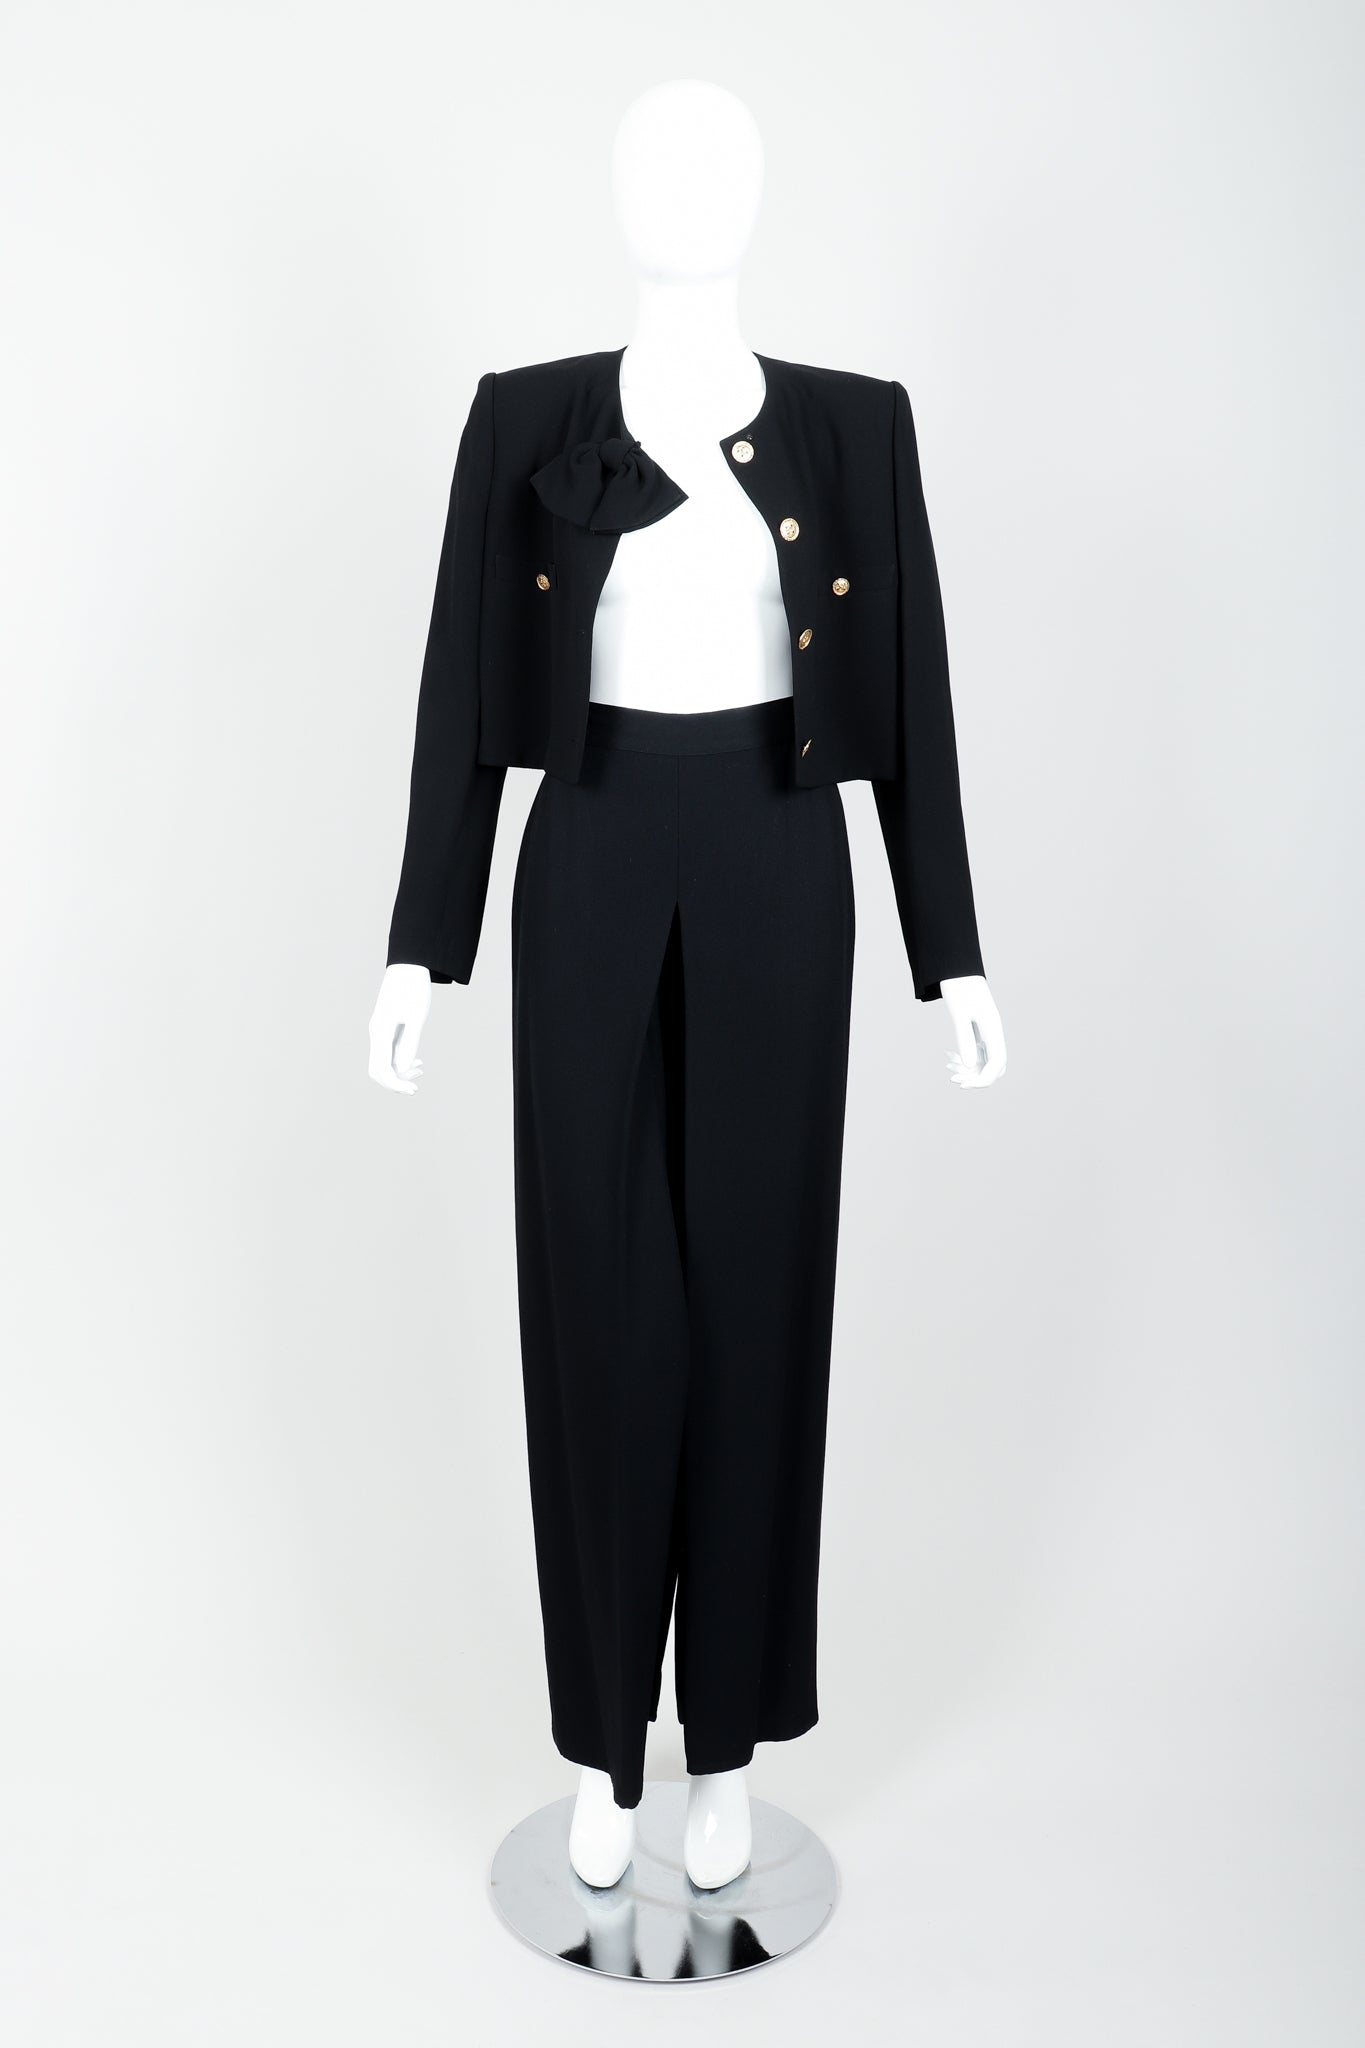 Vintage Sonia Rykiel Chanel Style Boxy Jacket & Pant Suit on Mannequin open at Recess